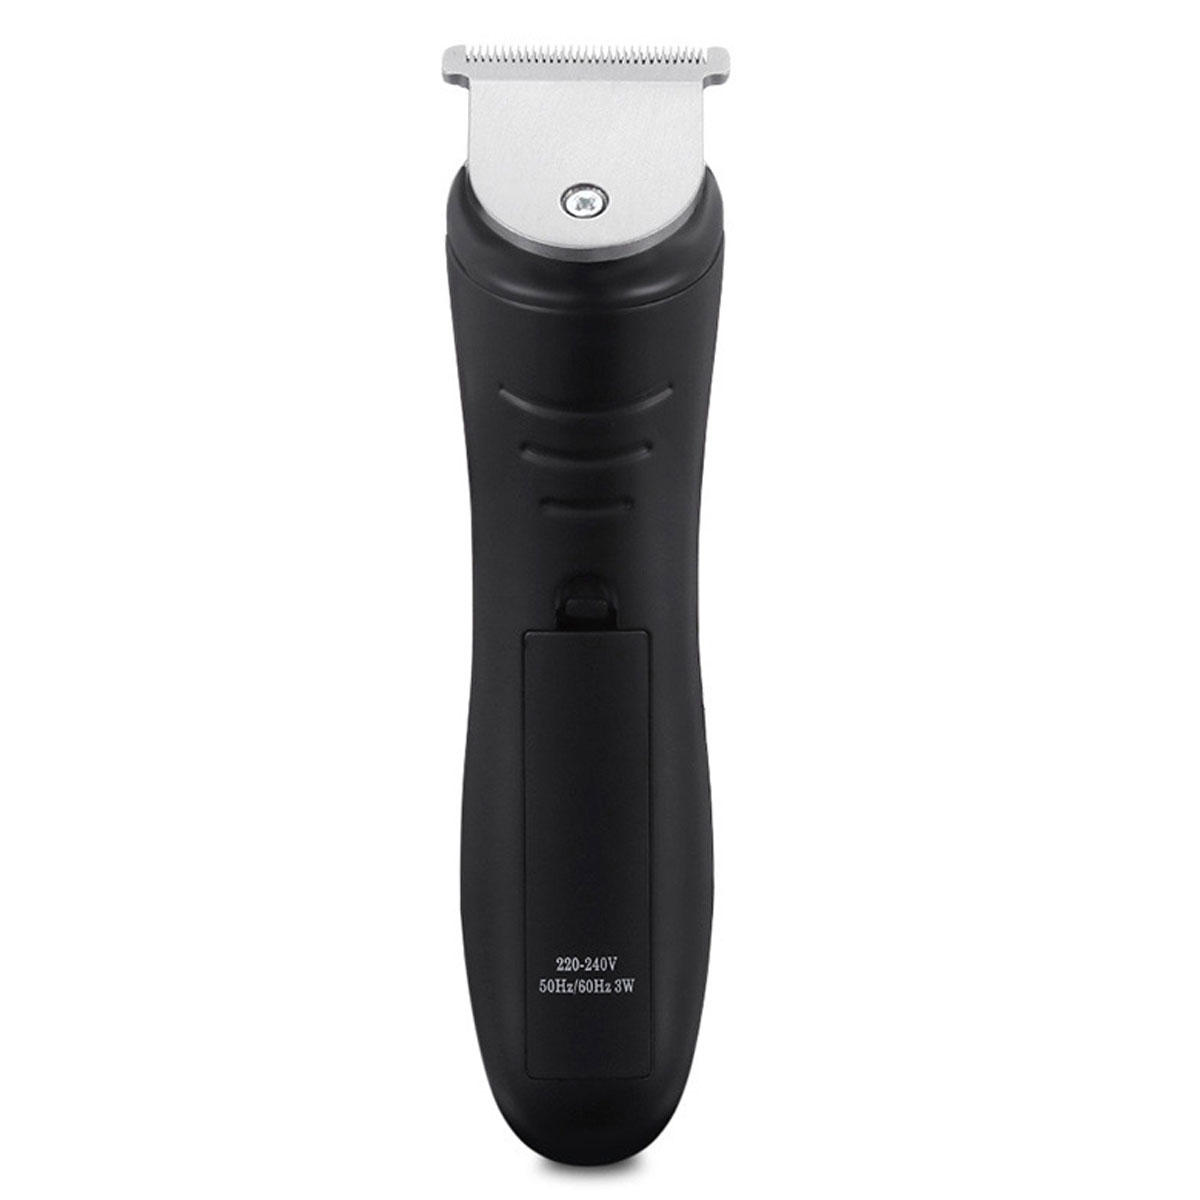  kemei  km  1407  electric shaver hair clipper trimmer at Banggood